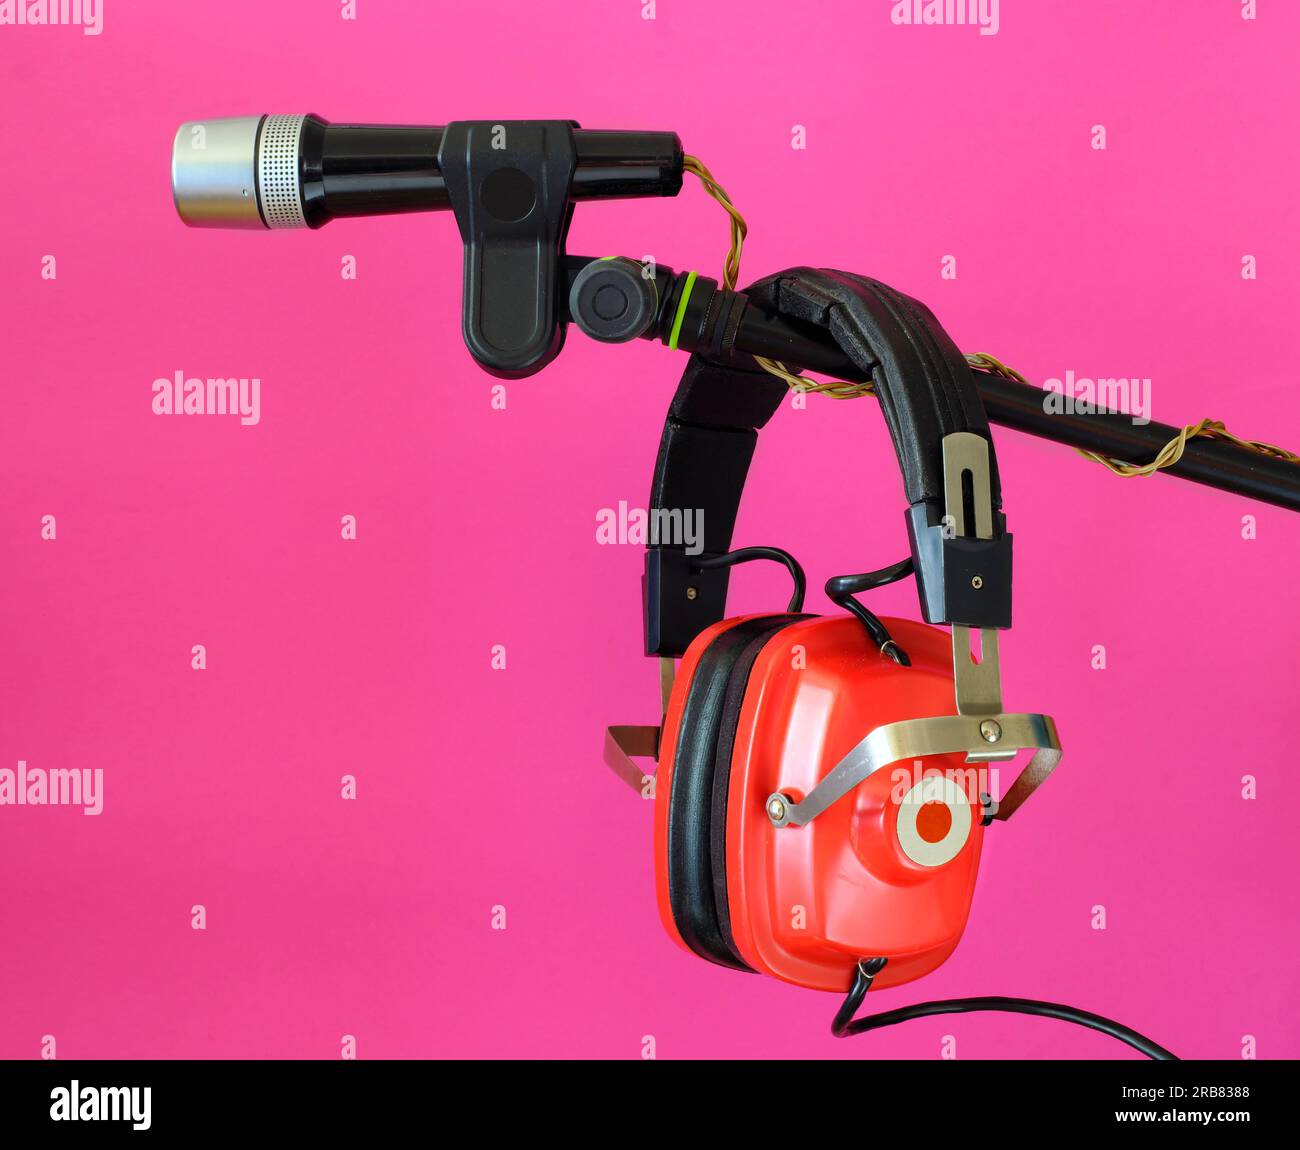 Vintage red headphone and old microphone on pink background, podcast,recording sound,vinatge audio gear concept. Free copy space. Stock Photo